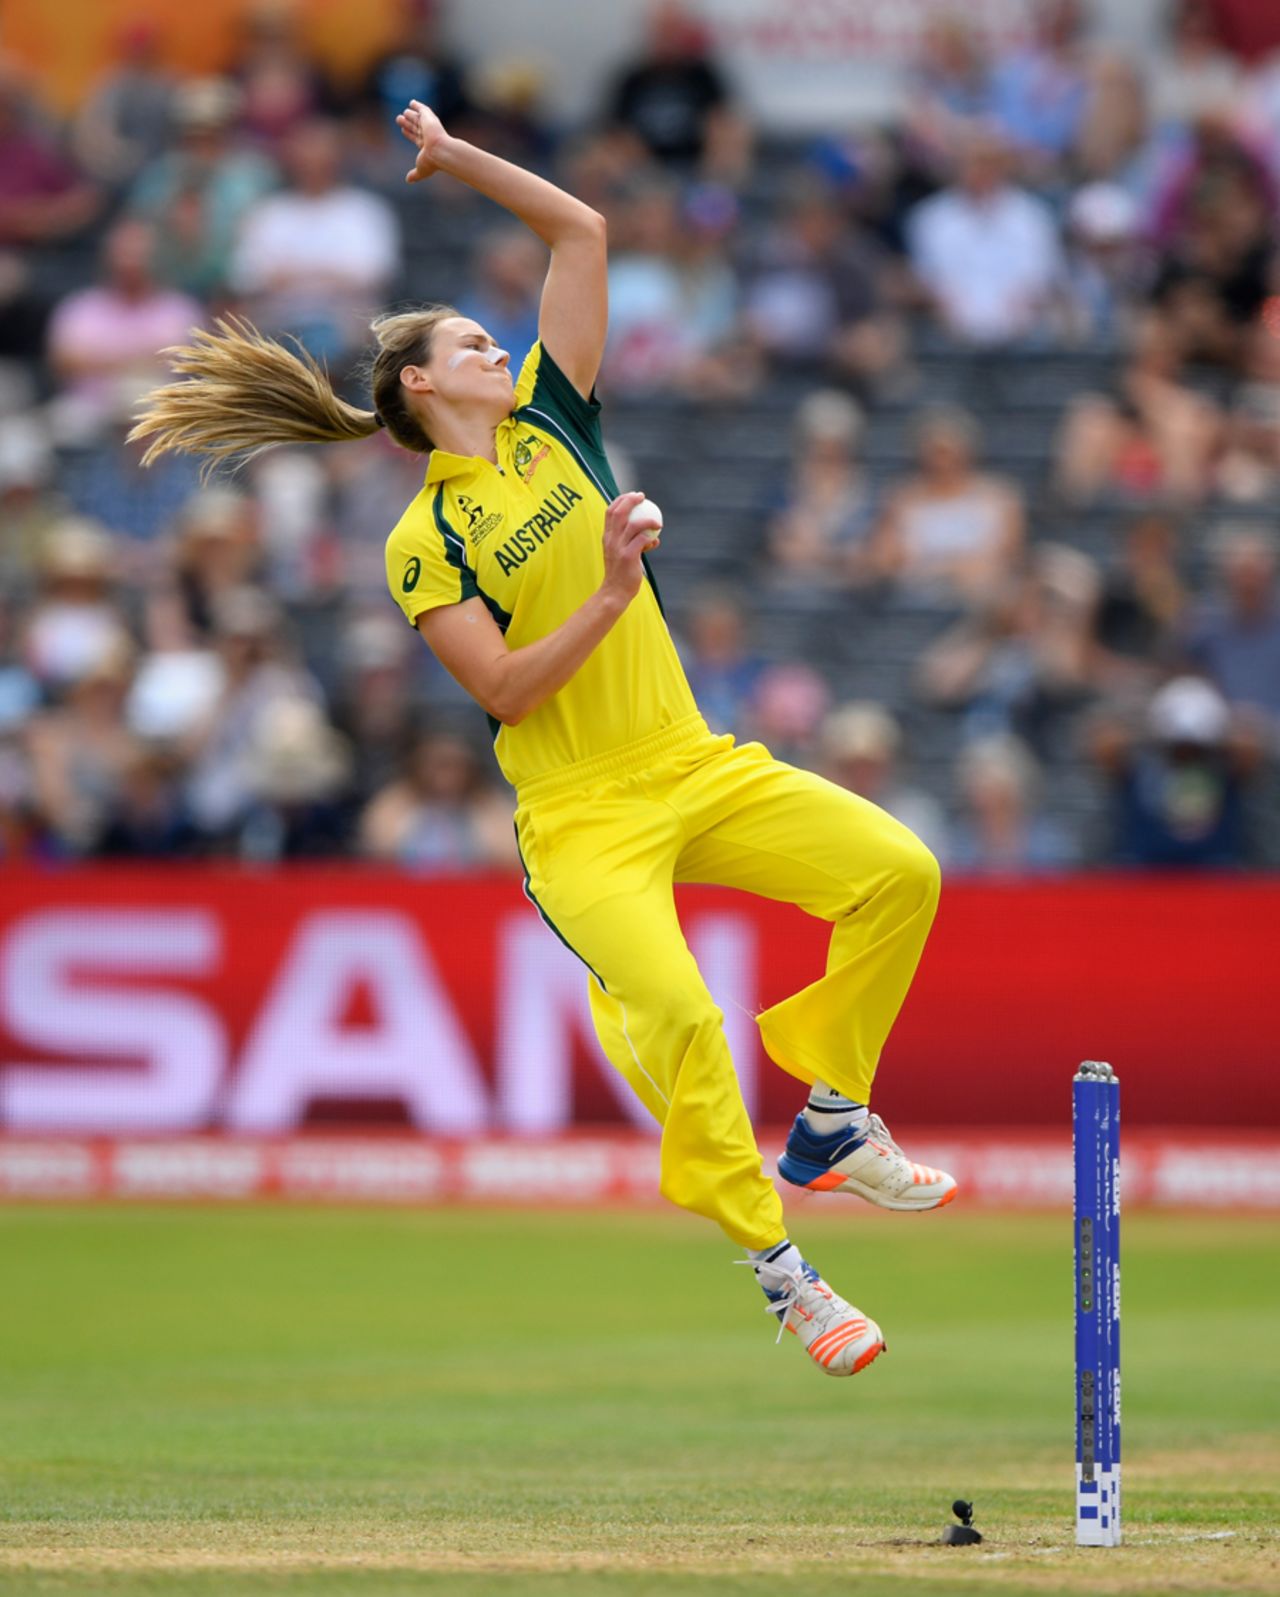 Ellyse Perry in her pre-delivery leap